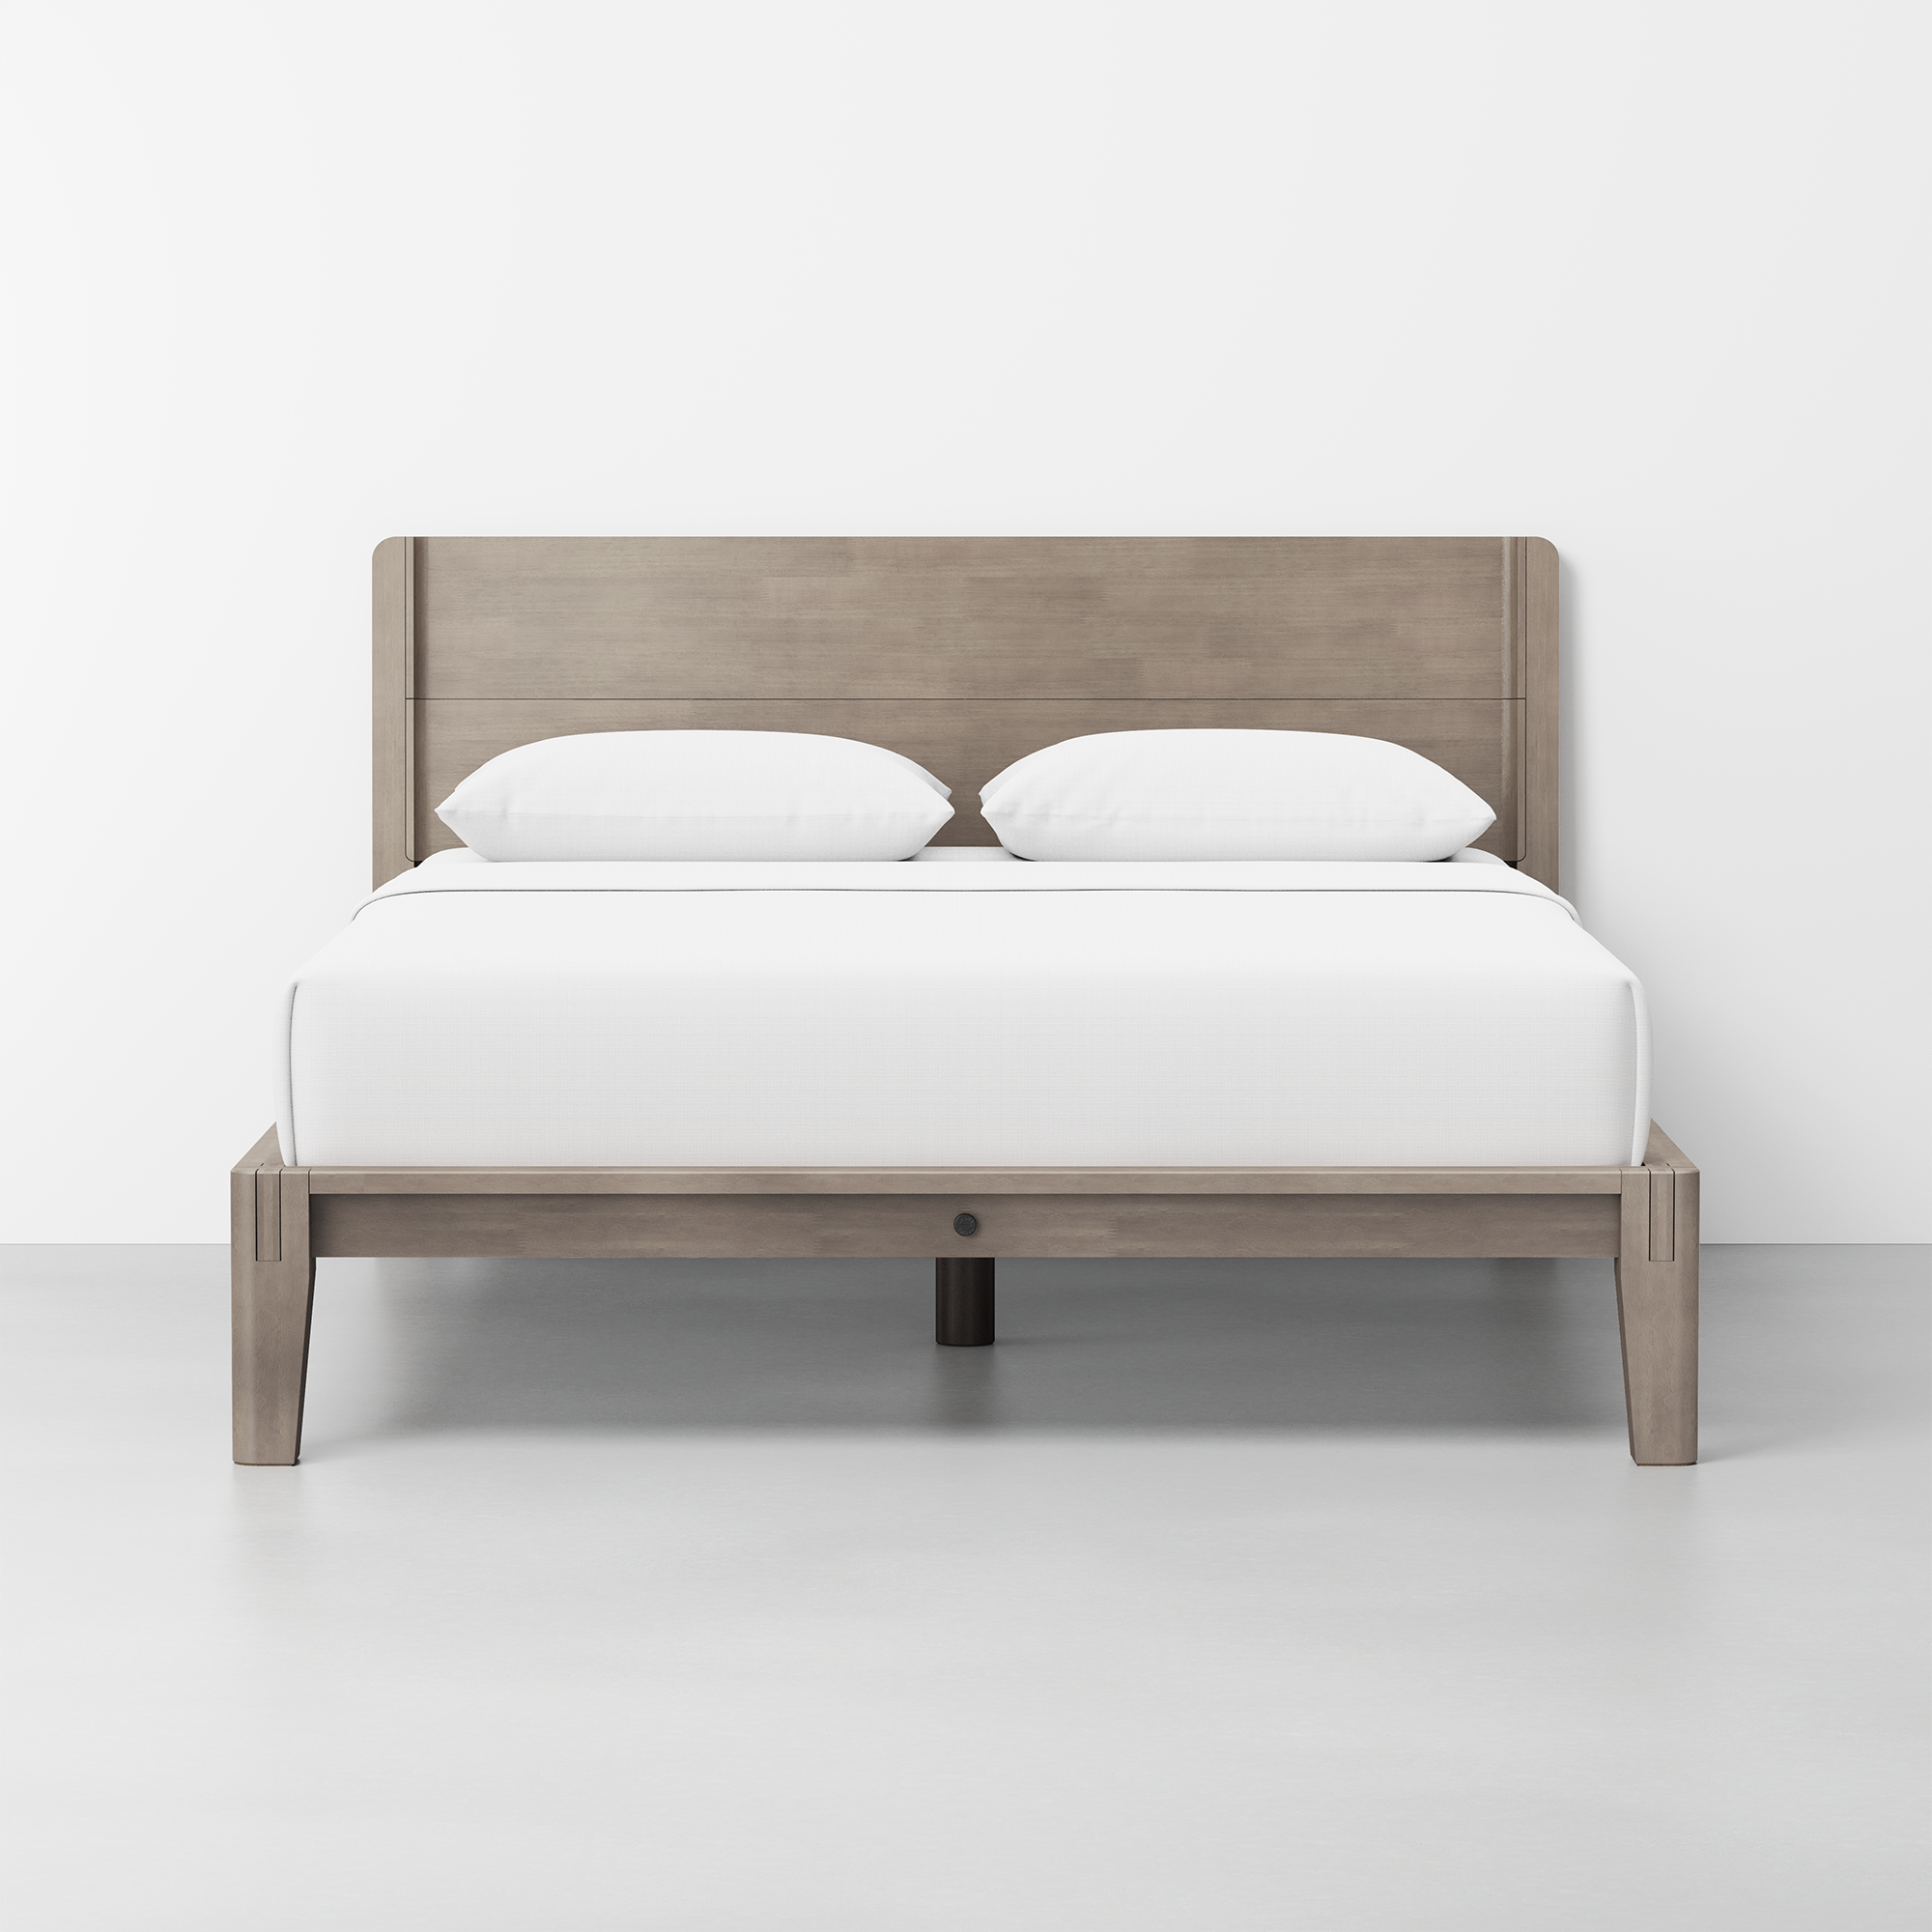 The Bed (Grey / Headboard) - Render - Front